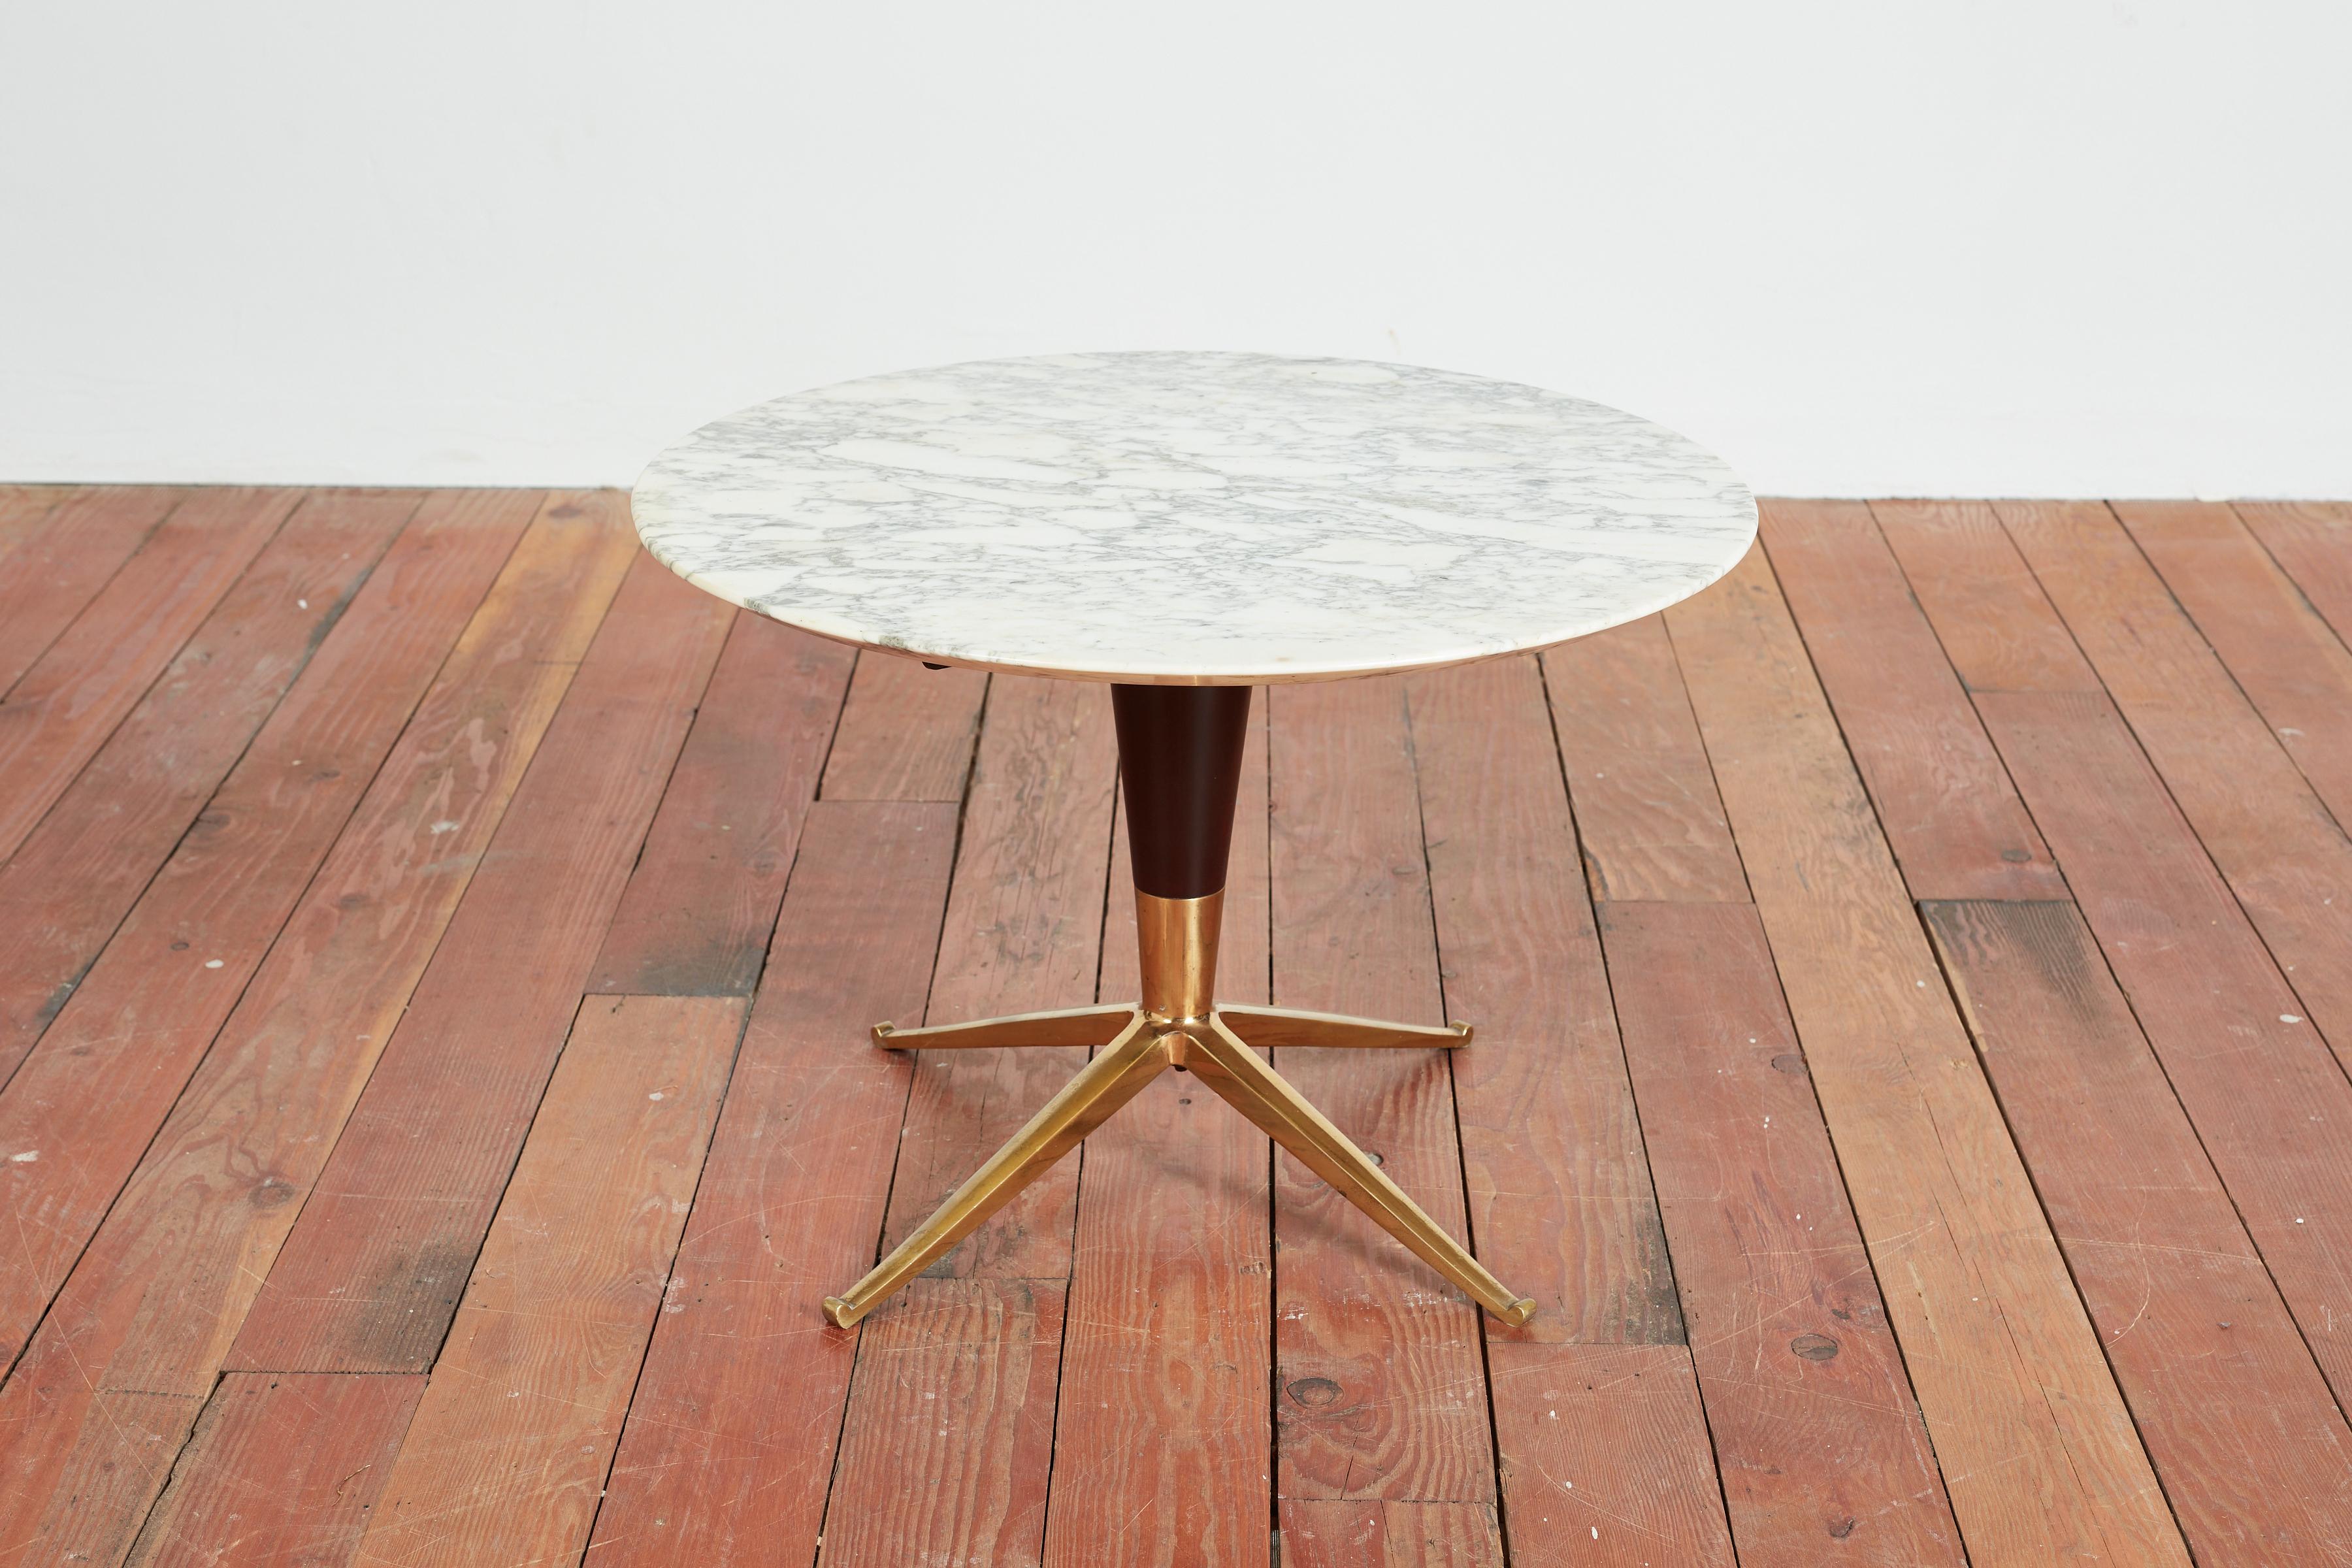 Handsome 1950s Italian table. 
Petite in scale with sculptural solid brass base with fluted wood and gorgeous marble top.